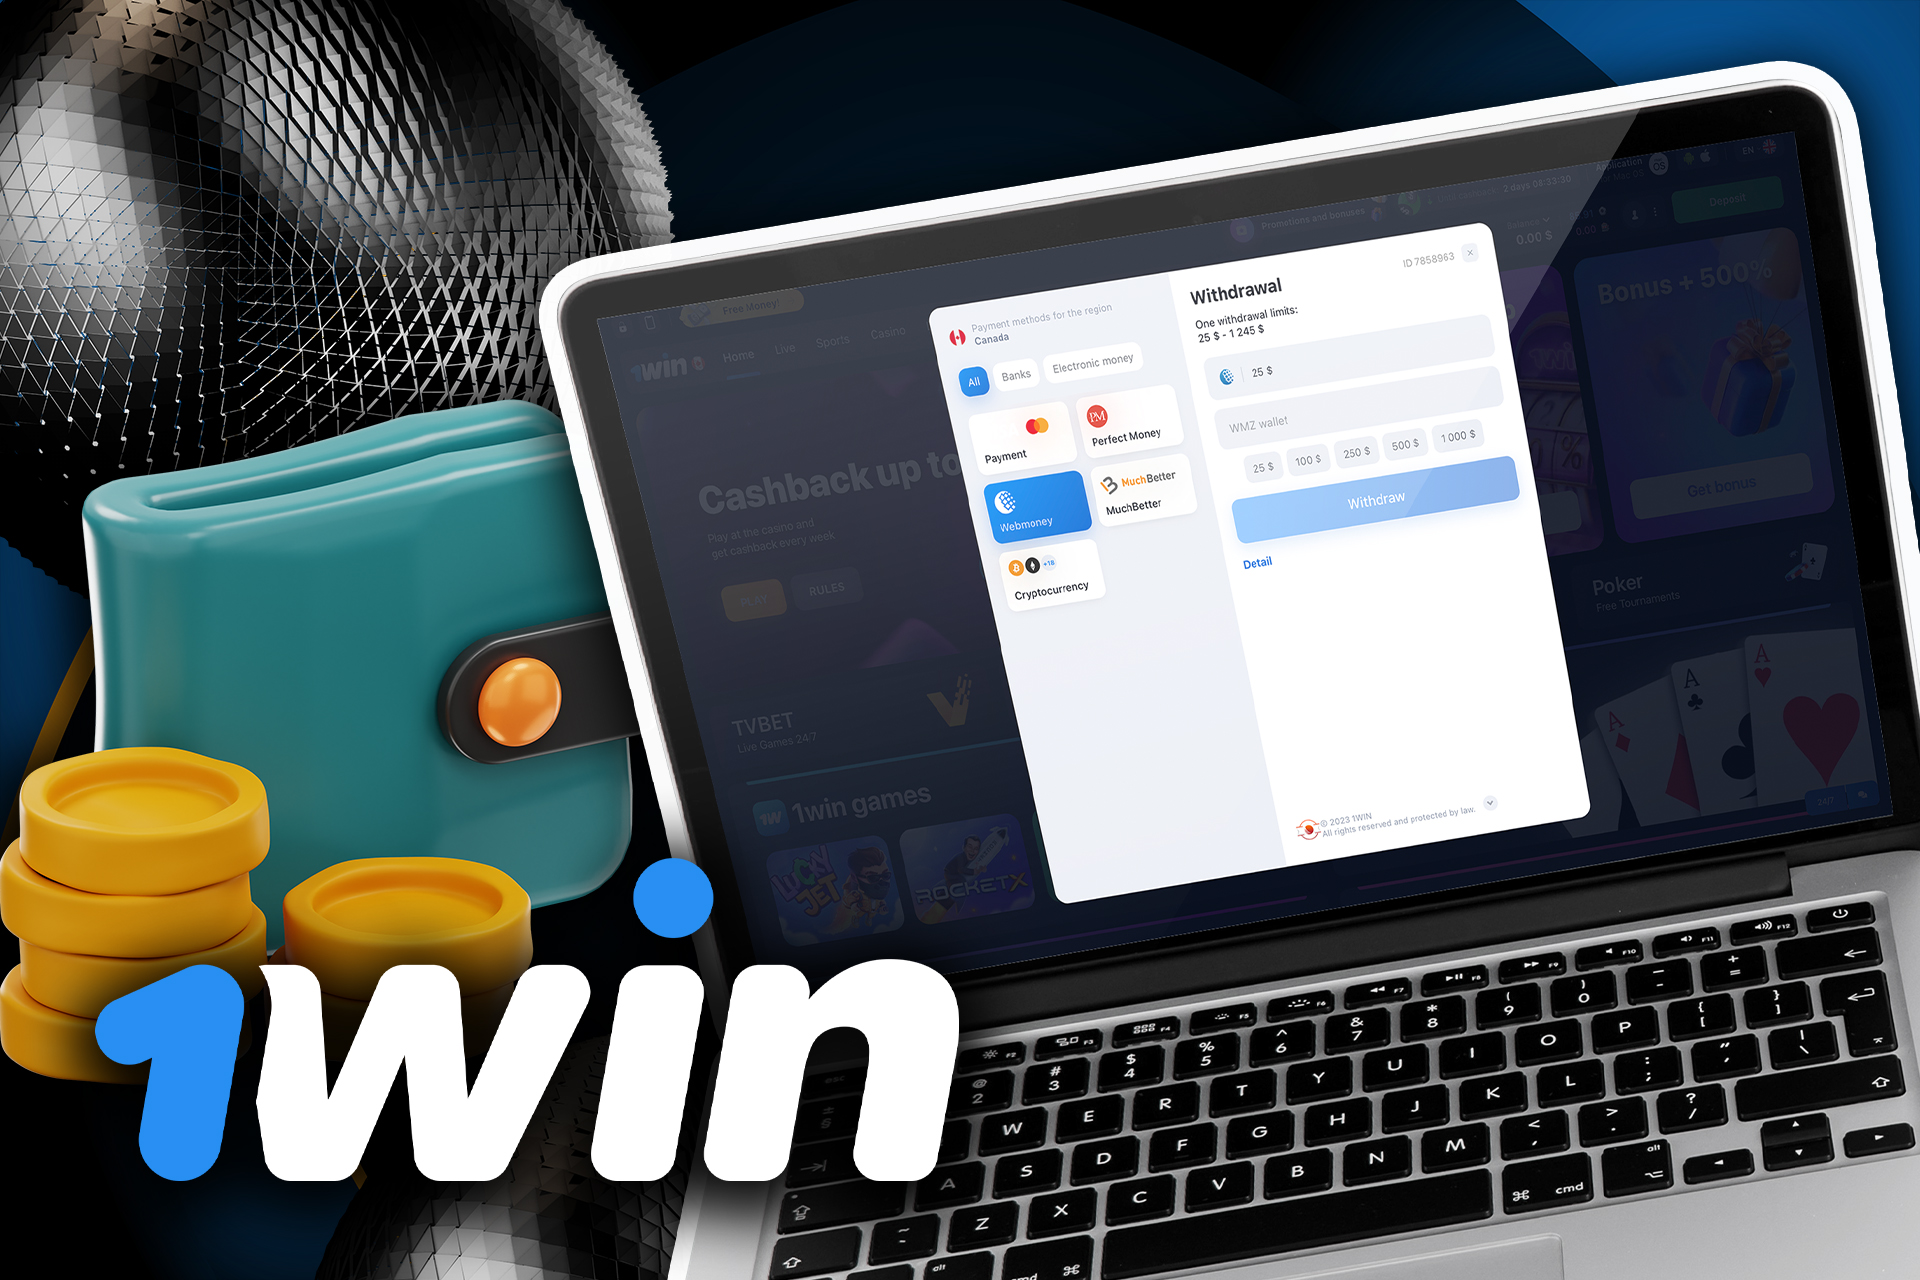 Follow our guide to deposit and withdraw money on 1win.